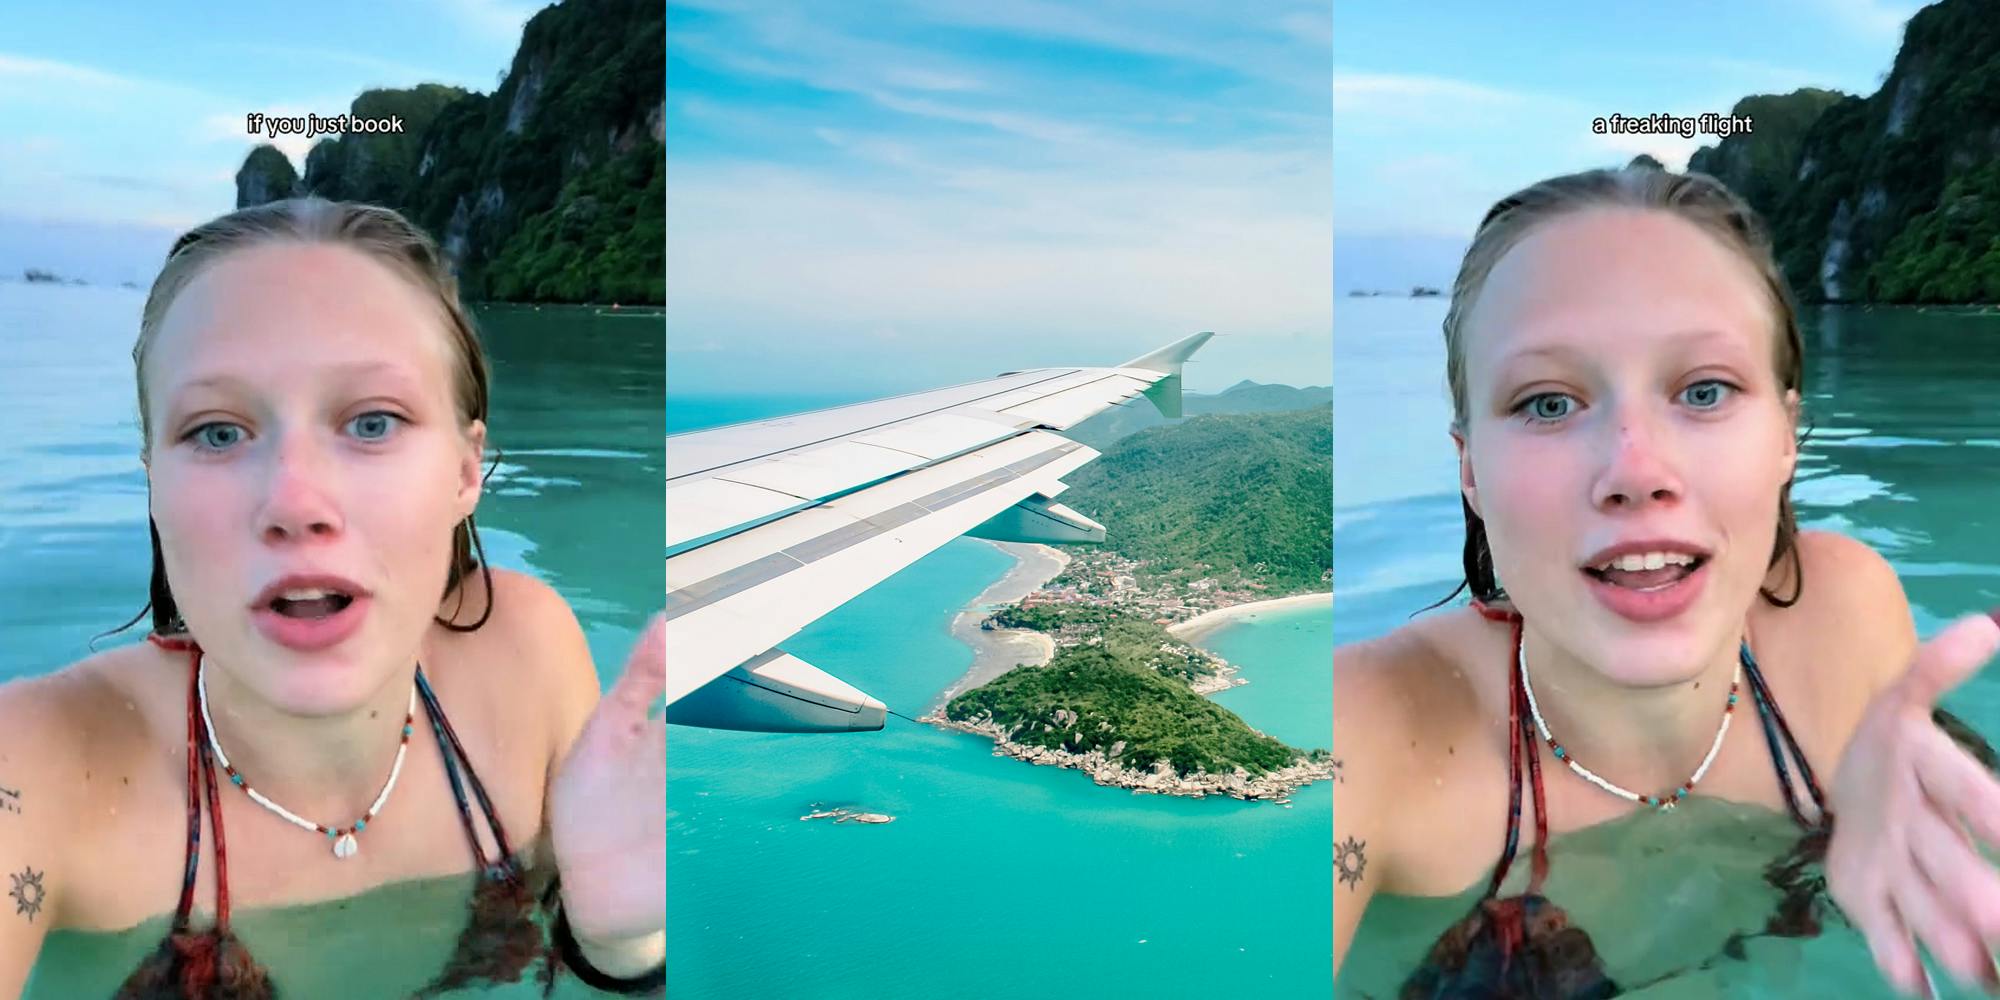 traveler in water in Thailand with caption "if you just book" (l) view over water from plane POV (c) traveler in water in Thailand with caption "a freaking flight" (r)